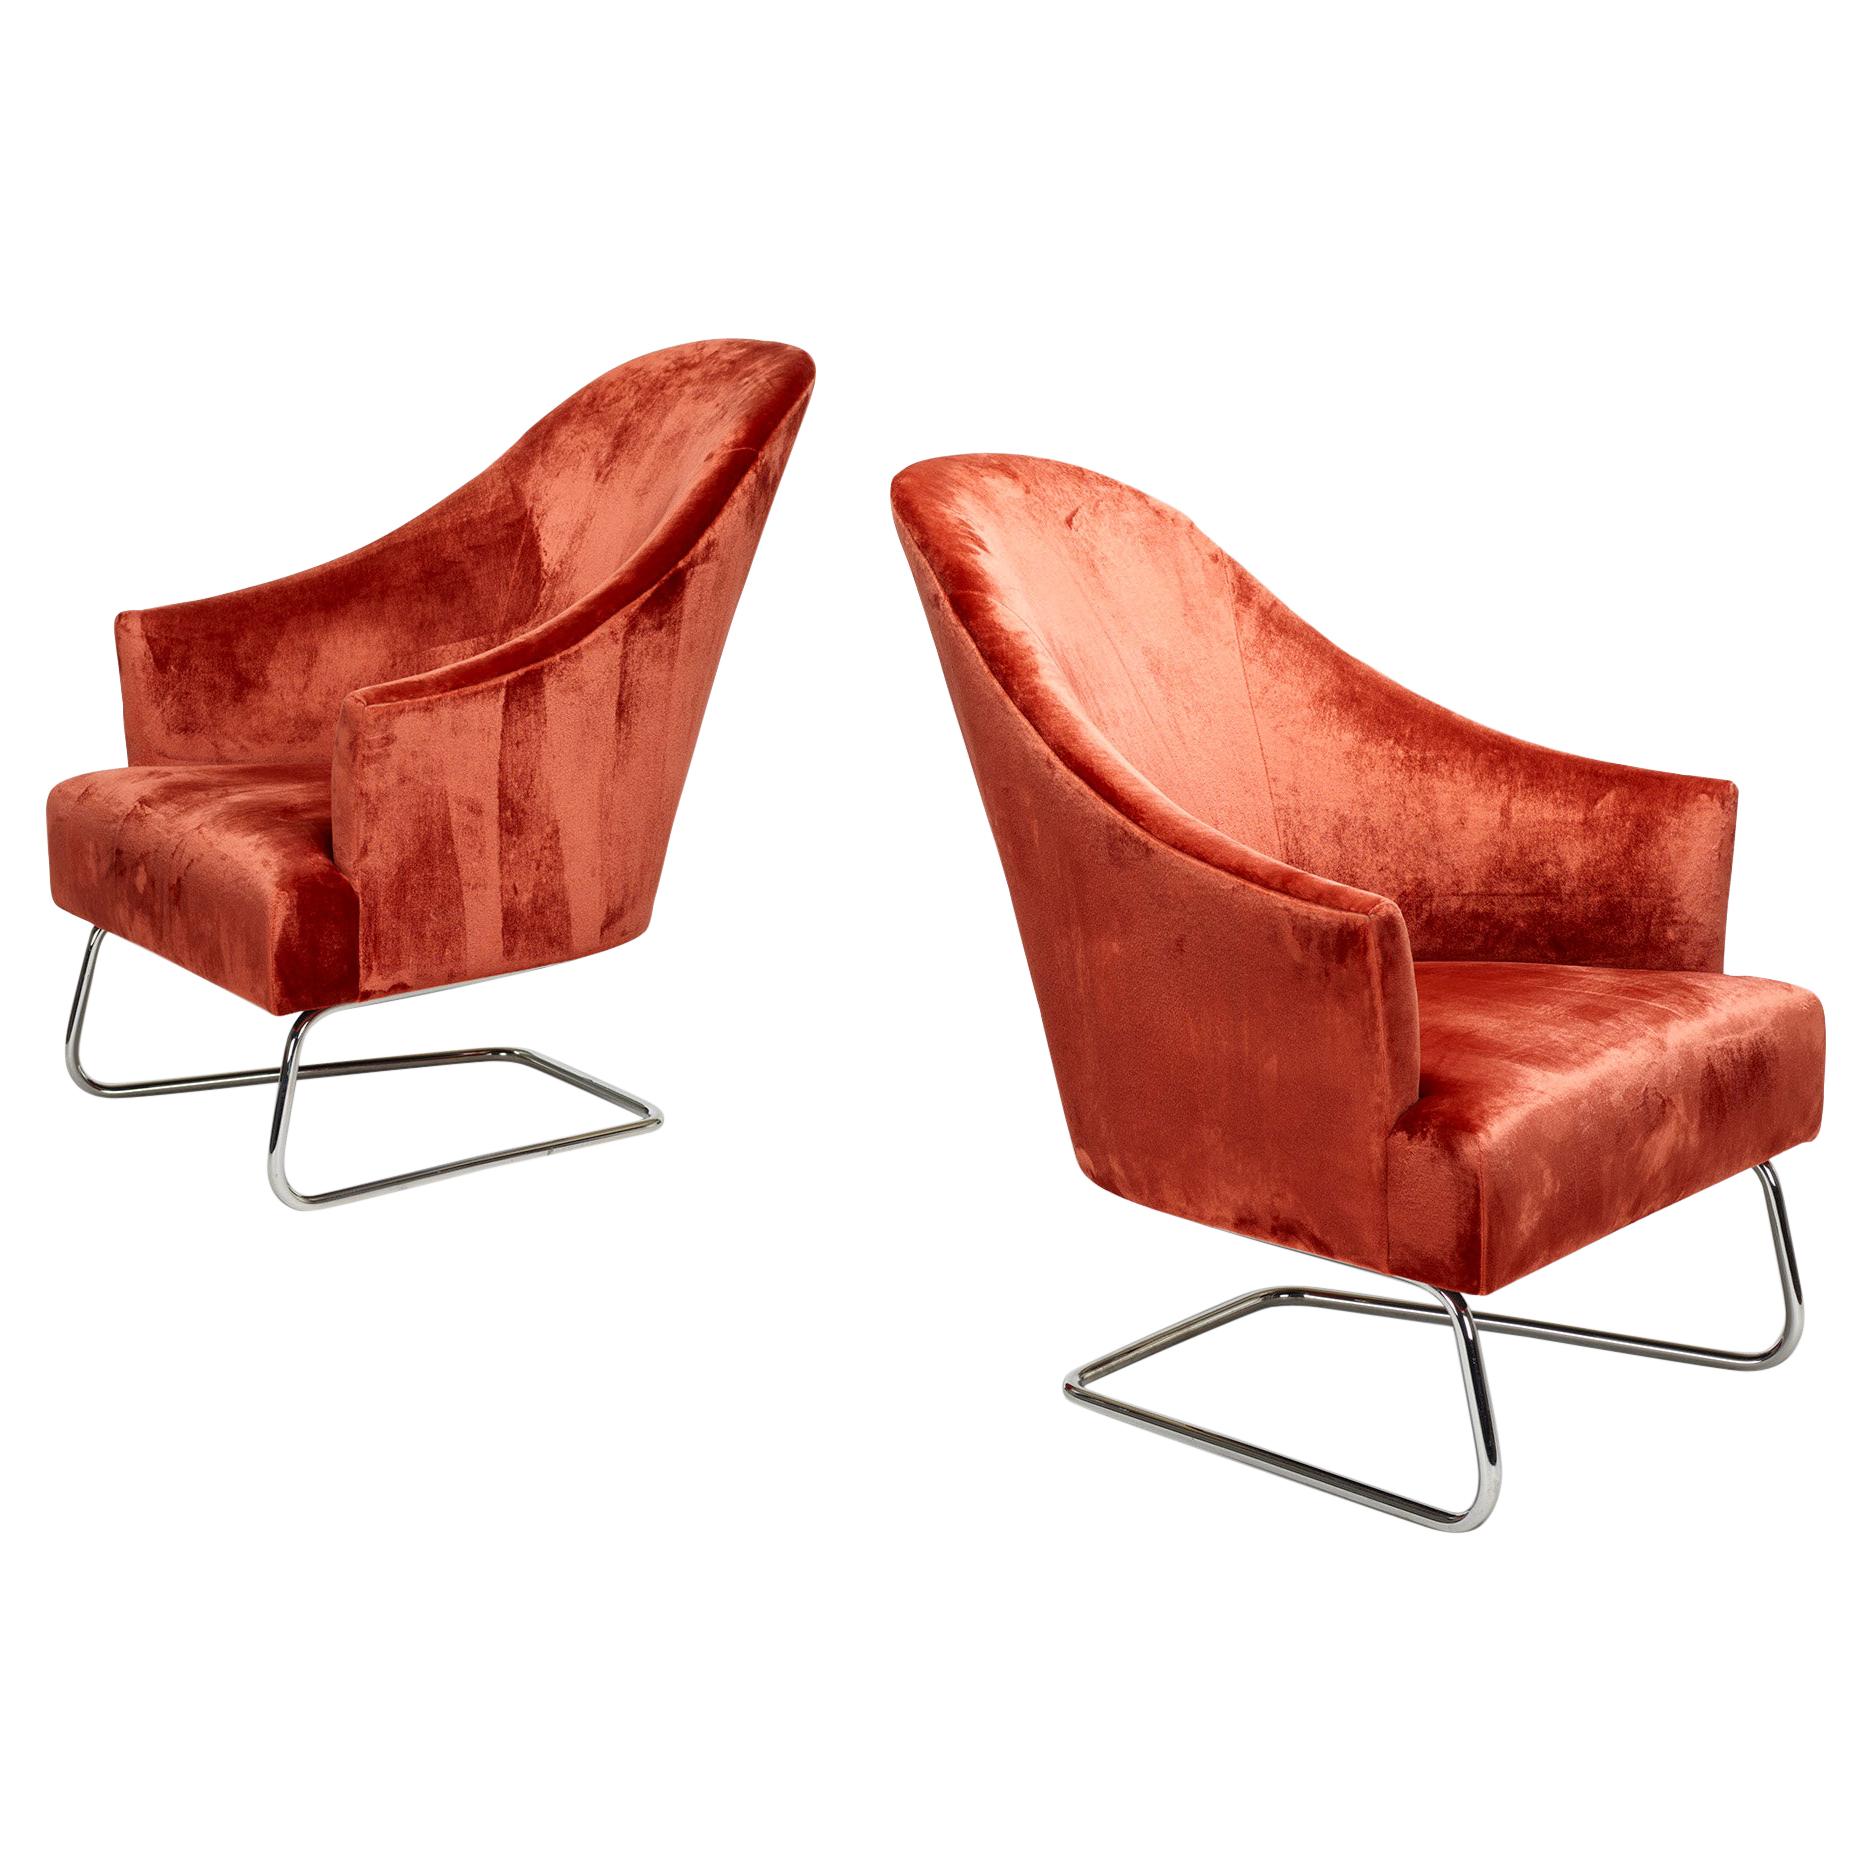 Pair Cantilevered Lounge Chairs by Joseph D'Urso For Sale